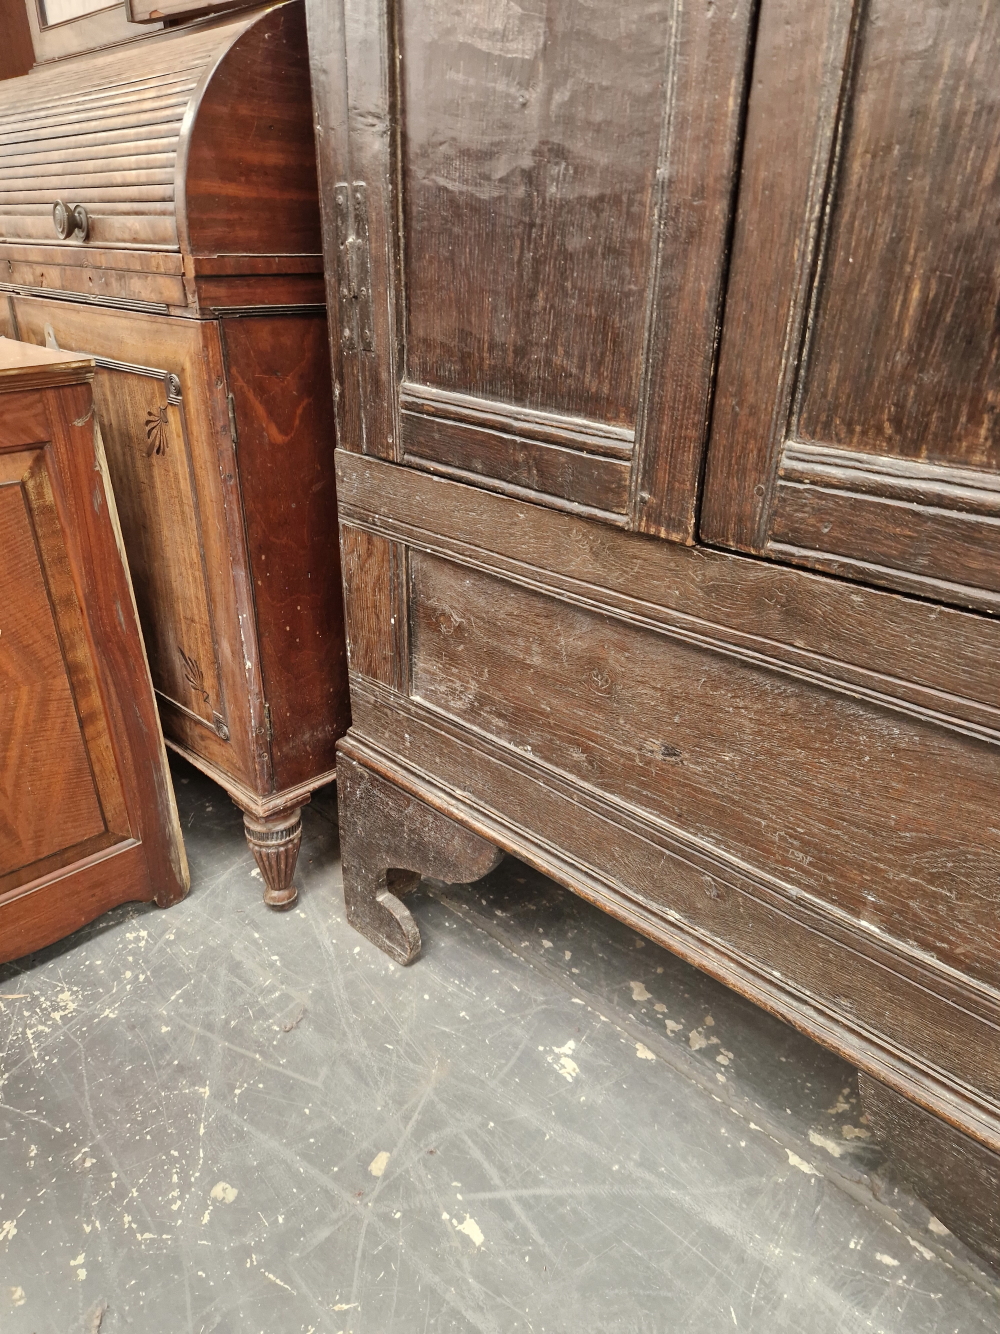 AN ANTIQUE OAK WARDROBE, THE DOORS WITH TWO PANELS AND ENCLOSING HANGING SPACE.   W 92 x D 47 x H - Image 4 of 8